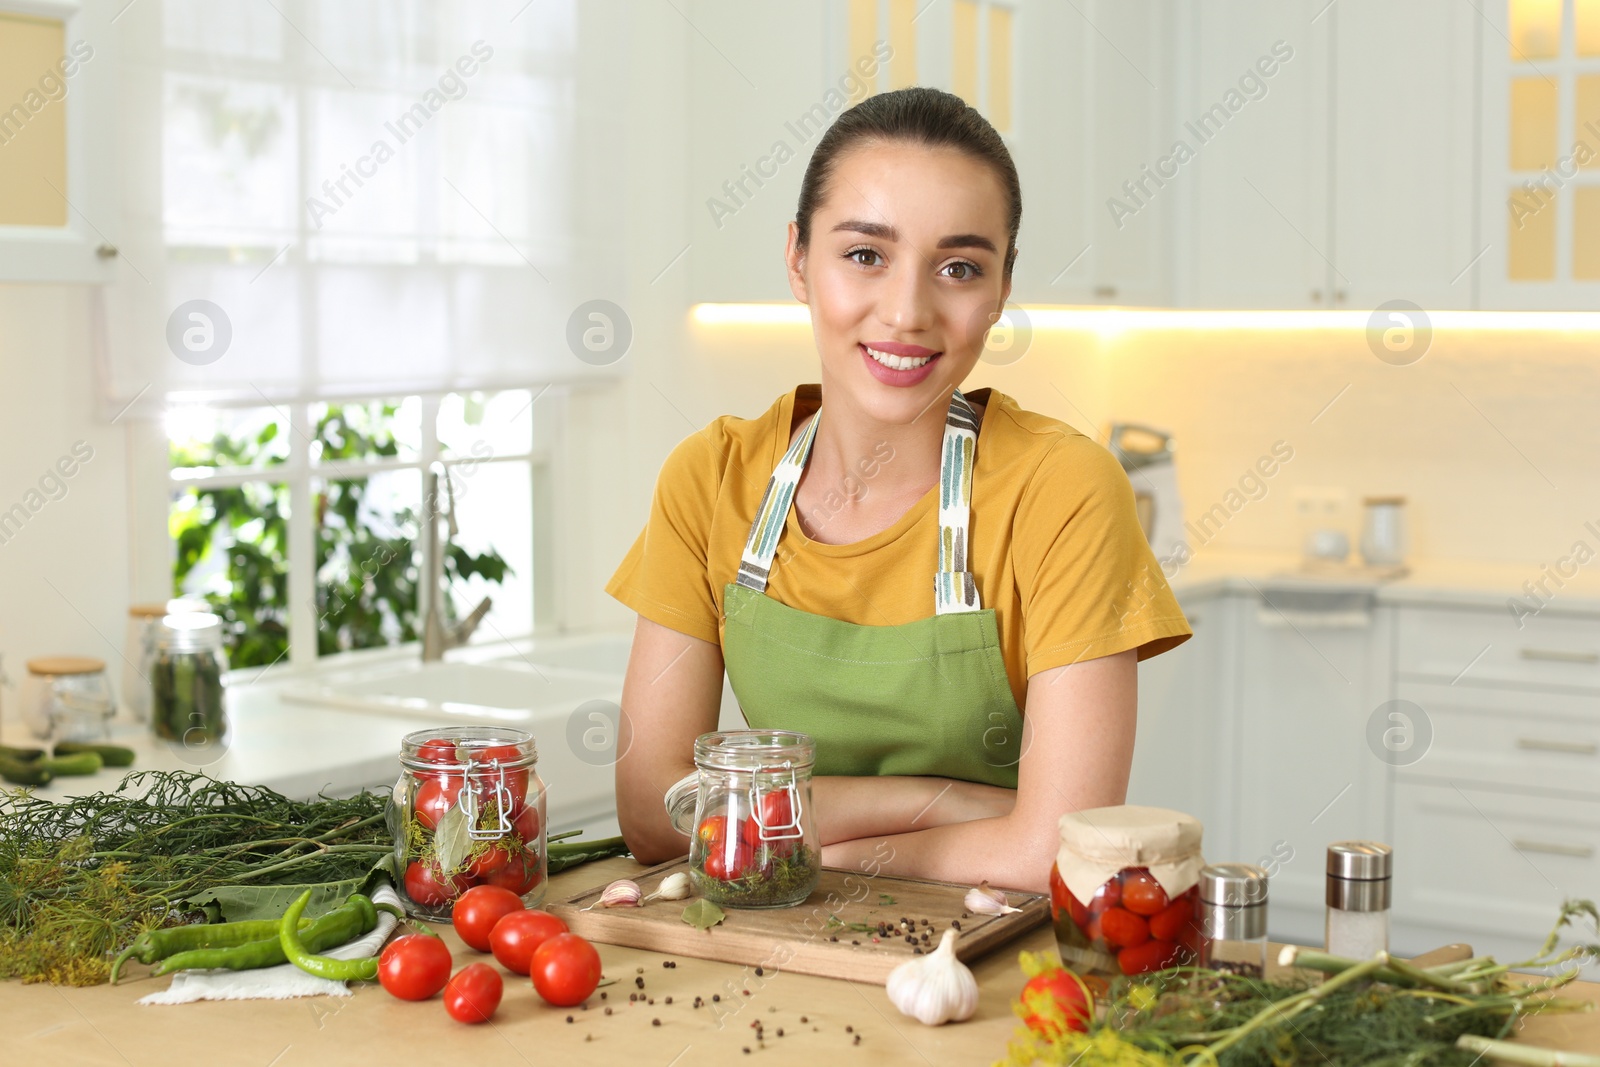 Photo of Young woman with vegetables and pickling jars at table in kitchen